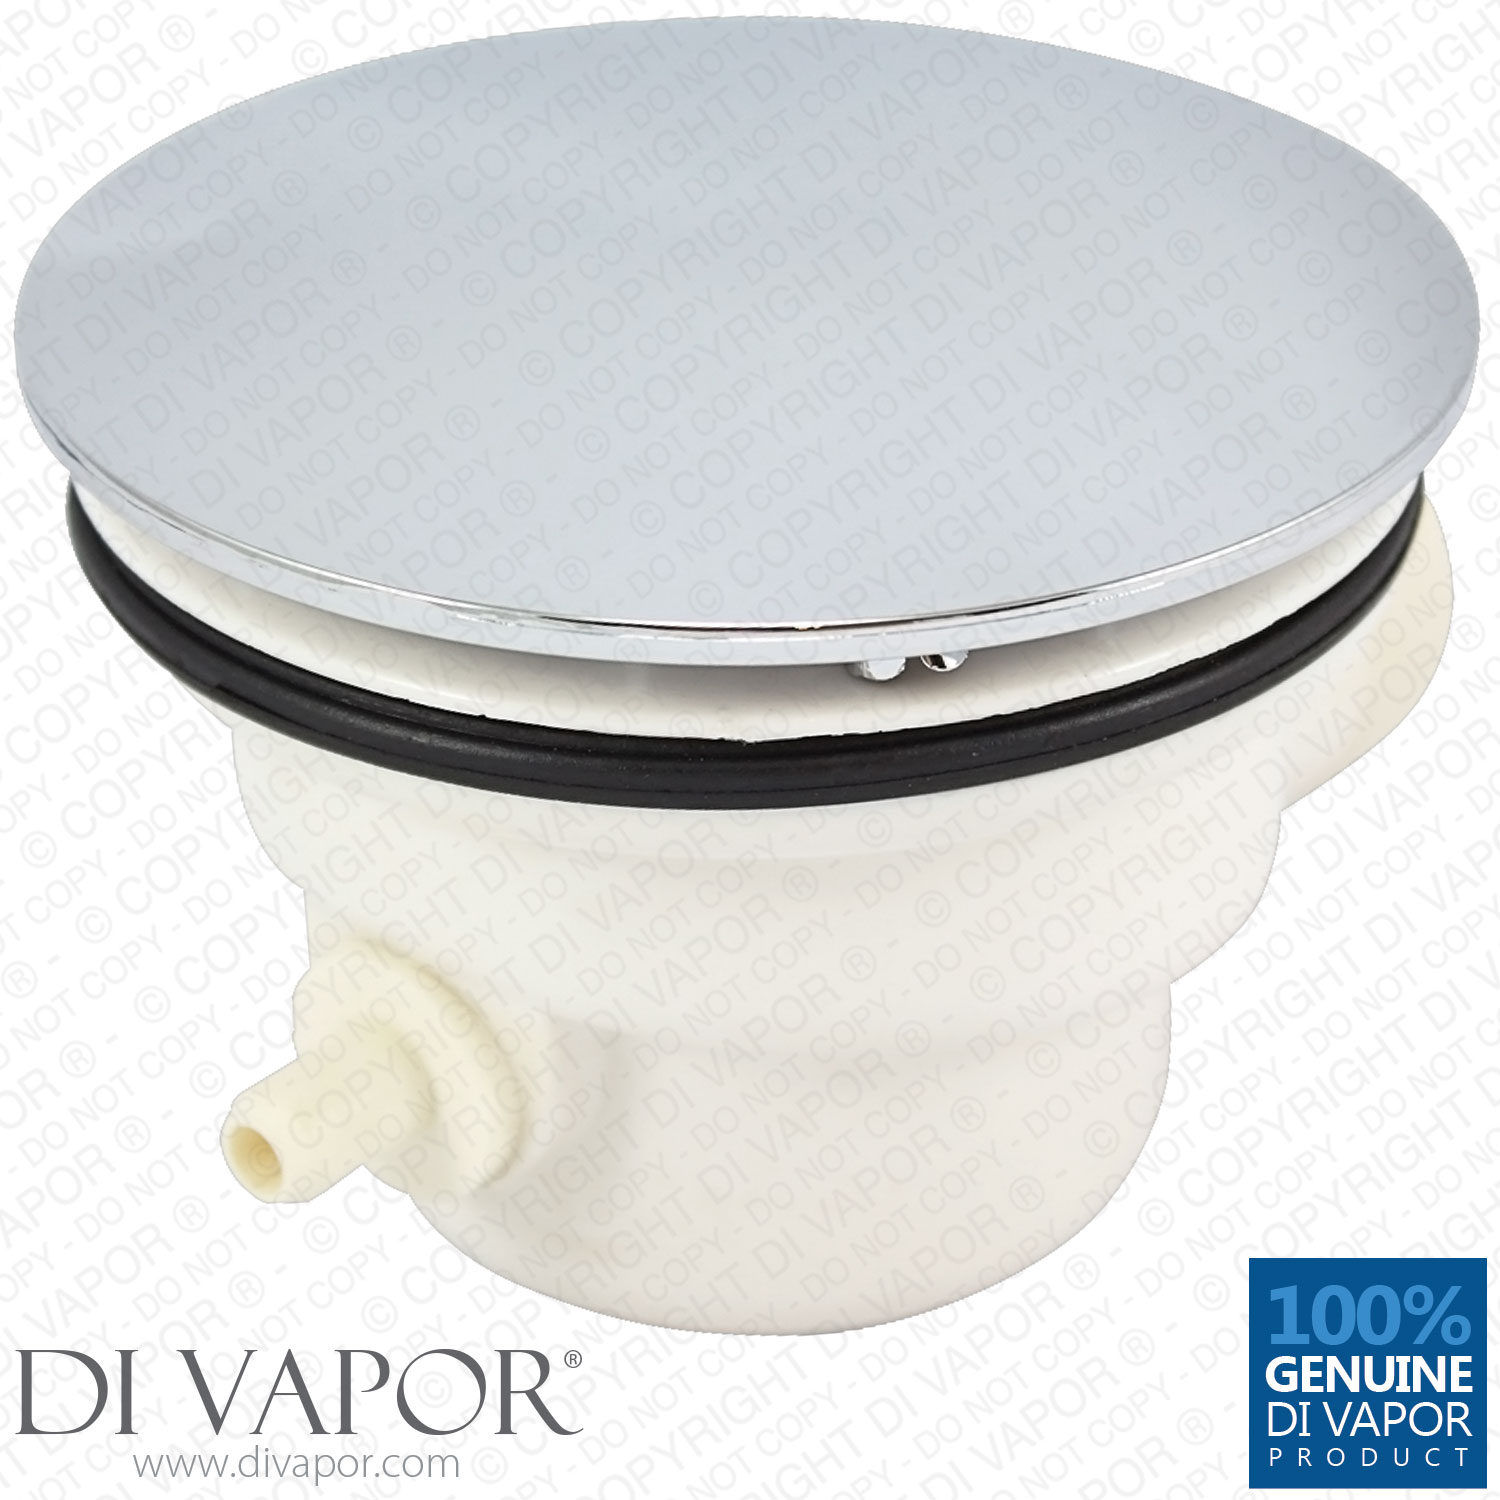 R Di Vapor Plastic Shower Waste Drain Trap with Chrome Cover with Steam Pipe 